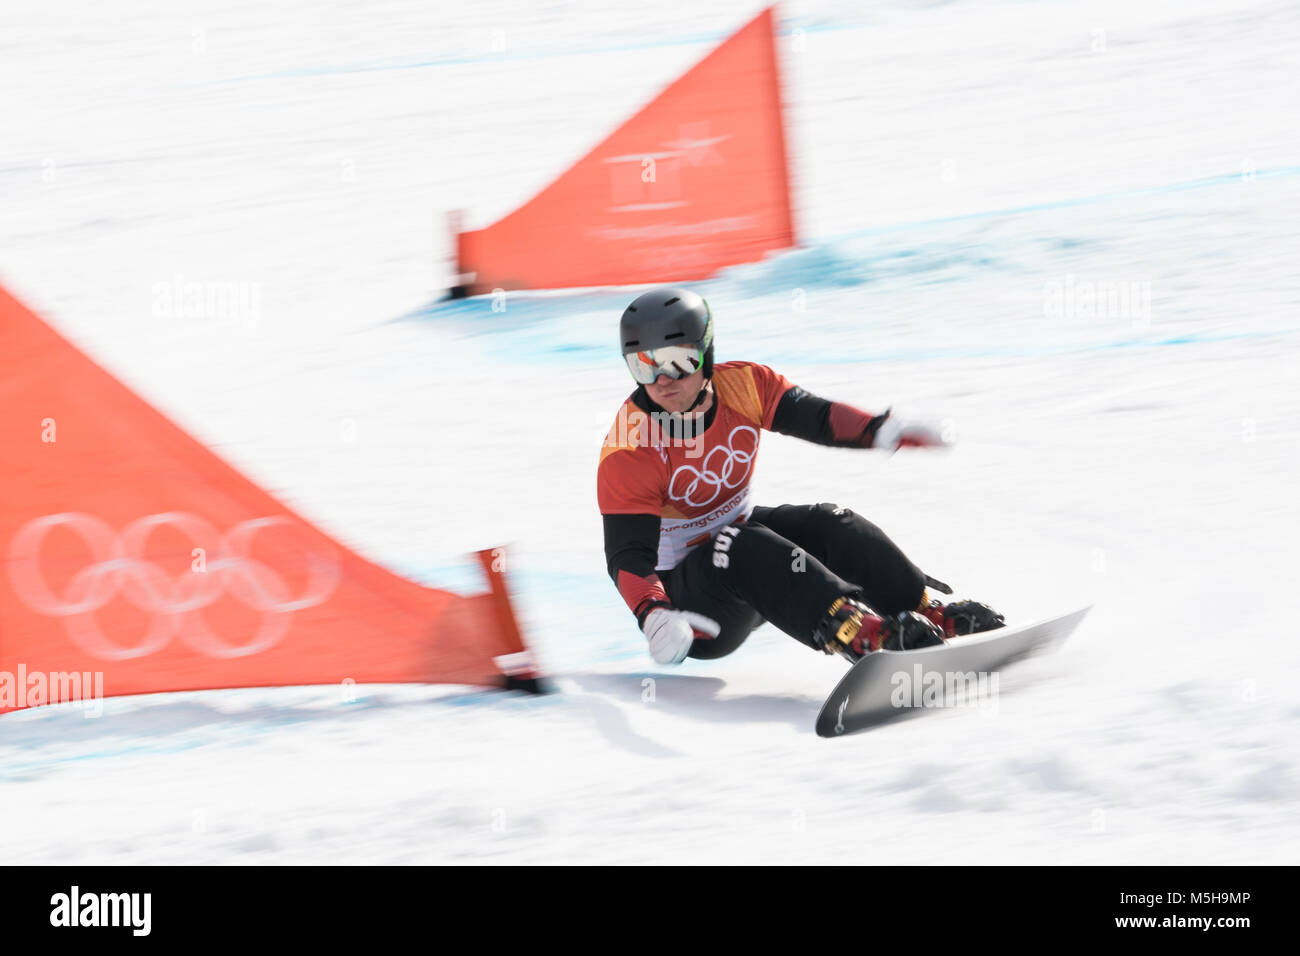 Pyeongchang, South Korea. 24th Feb, 2018. Nevin Galmarini of Switzerland competes during men's parallel giant slalom of snowboard at the 2018 PyeongChang Winter Olympic Games at Phoenix Snow Park, PyeongChang, South Korea, Feb. 24, 2018. Nevin Galmarini won the gold medal in the big final. Credit: Wu Zhuang/Xinhua/Alamy Live News Credit: Xinhua/Alamy Live News Stock Photo